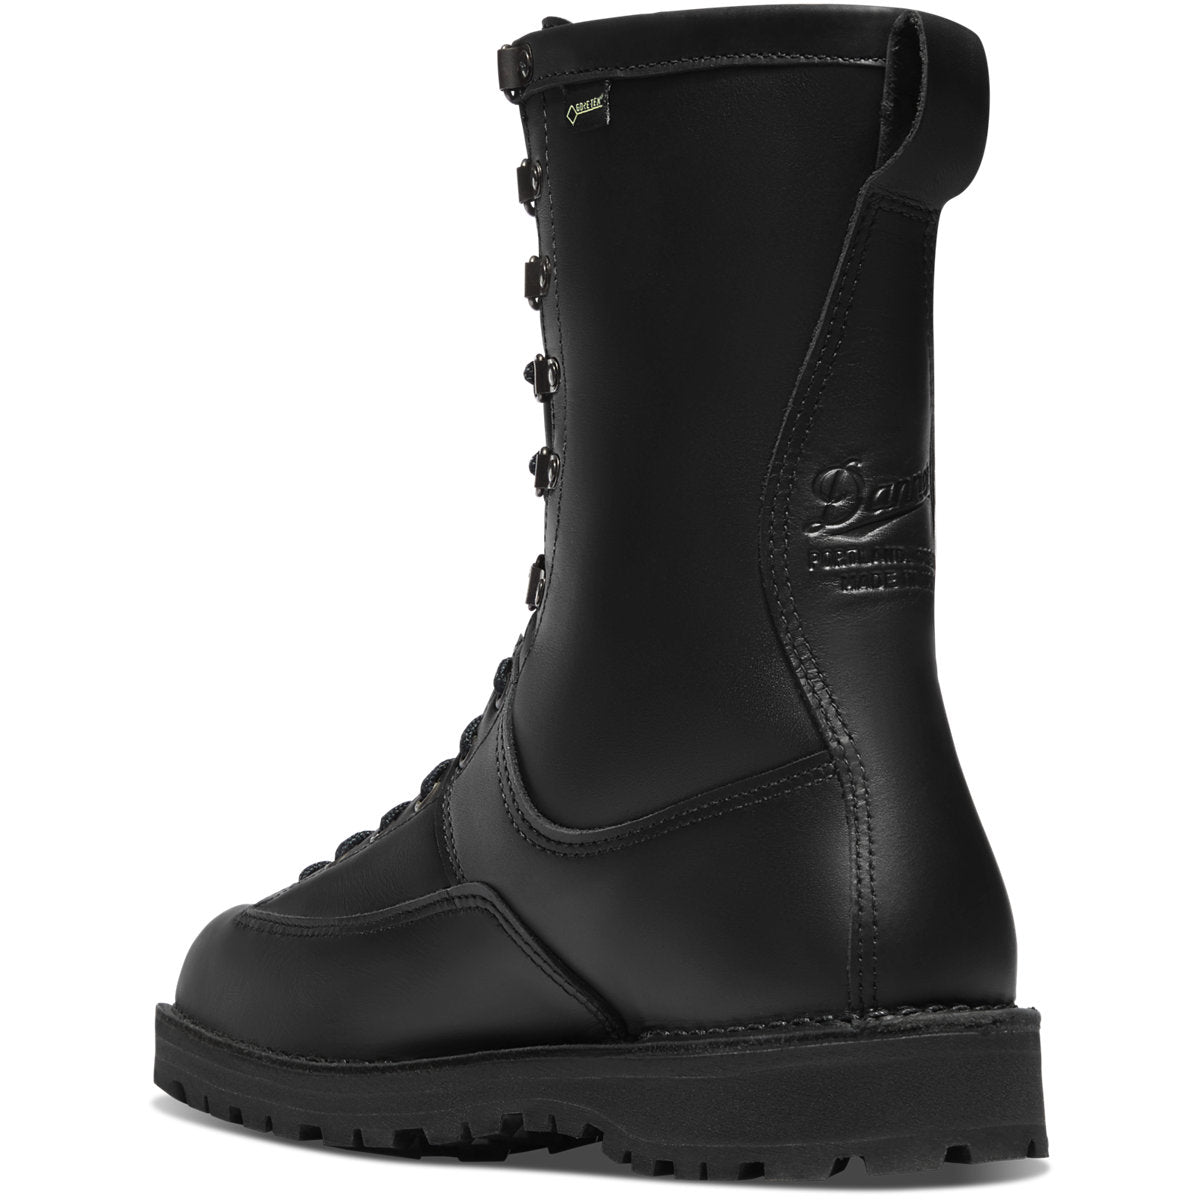 Danner Men's Fort Lewis USA Made 10" WP Duty Boot - Black - 29110  - Overlook Boots